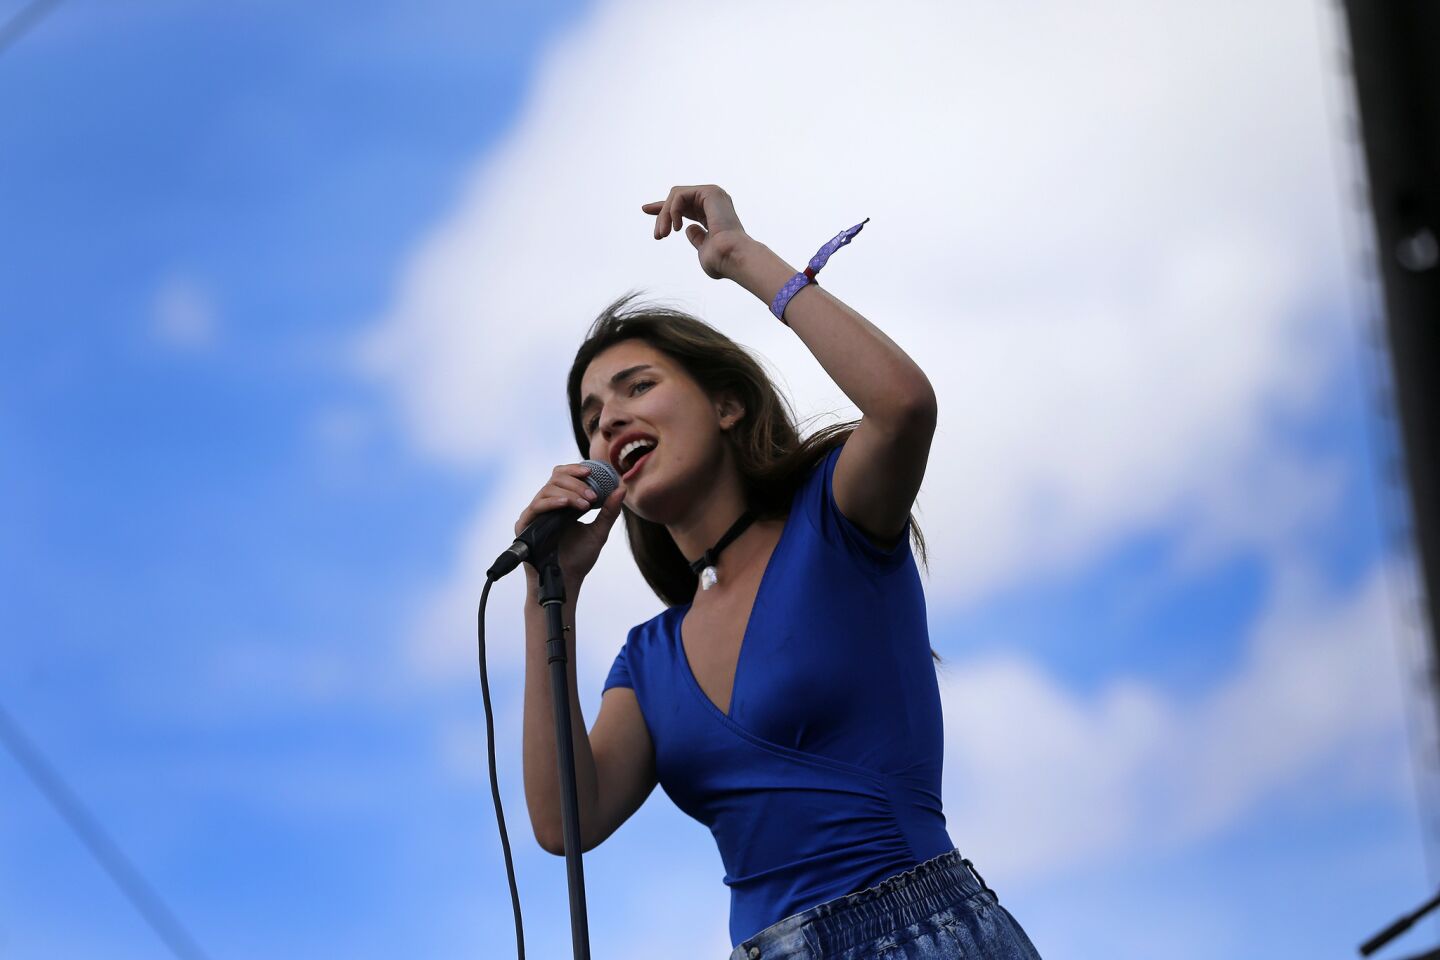 Rainey Qualley performs on the Mane Stage on the second day of the 10th edition of Stagecoach Country Music Festival at the Empire Polo Club in Indio on April 30.